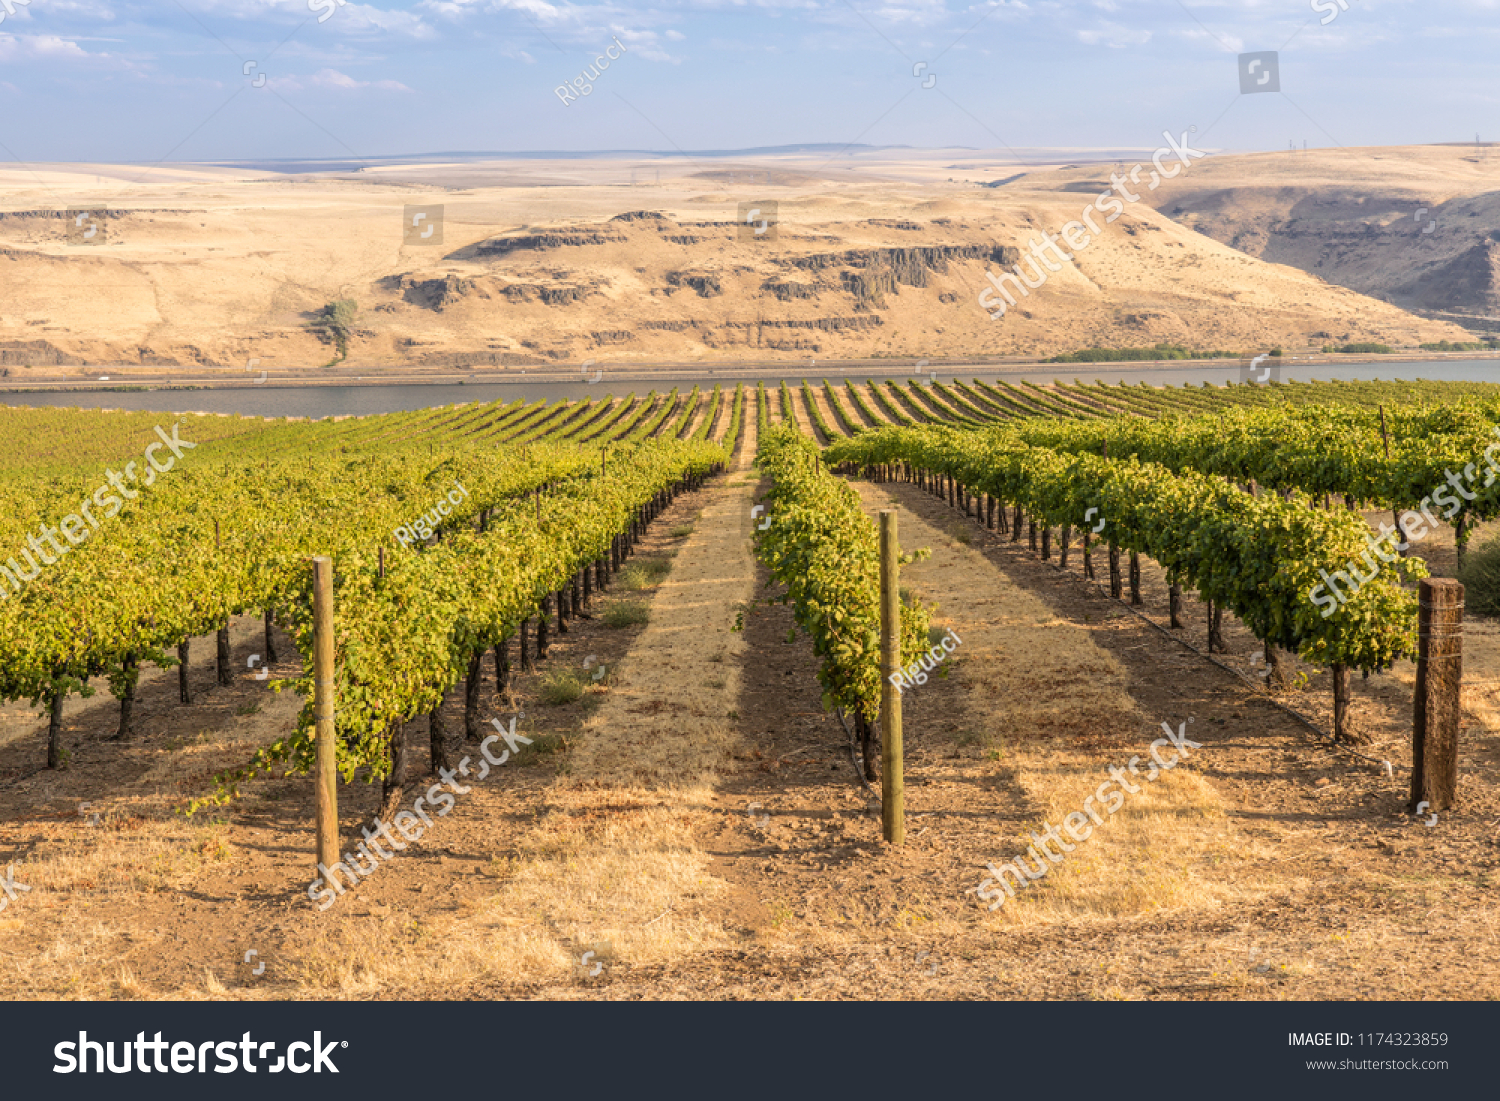 Vineyards landscape in the Columbia River Gorge Washington state. #1174323859